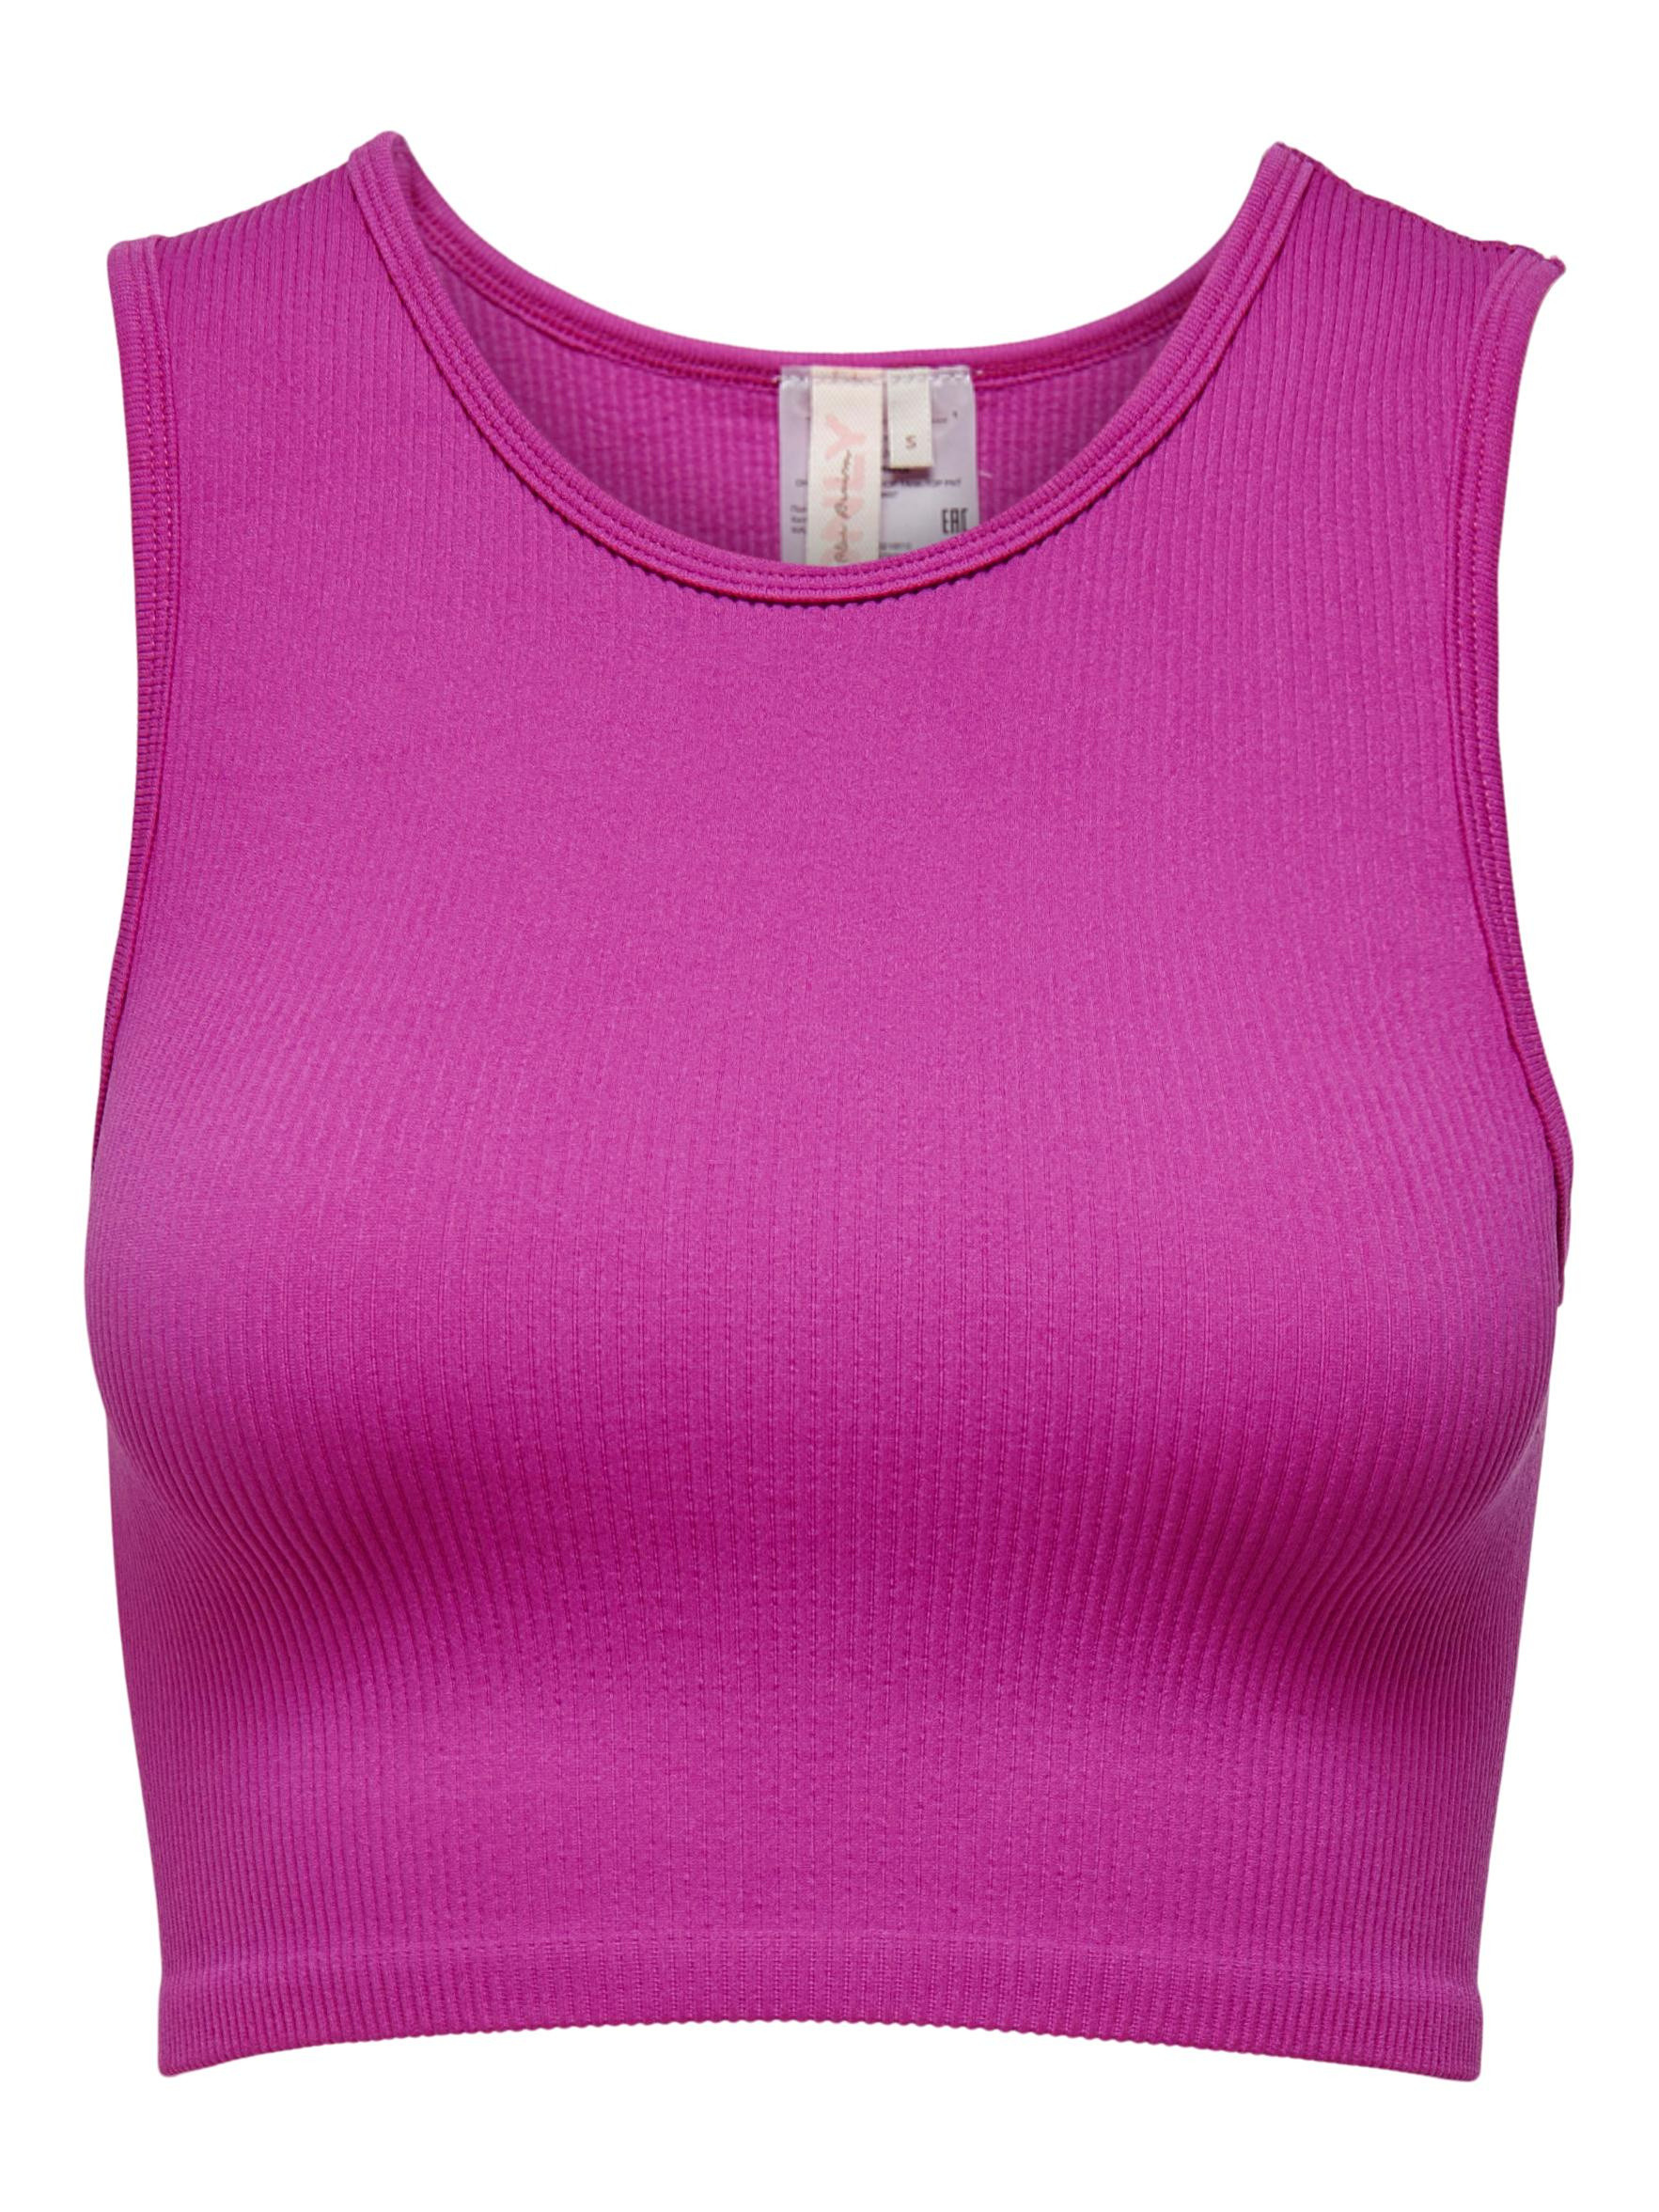 Only - Top stretch fit, Rosa peonia, large image number 0